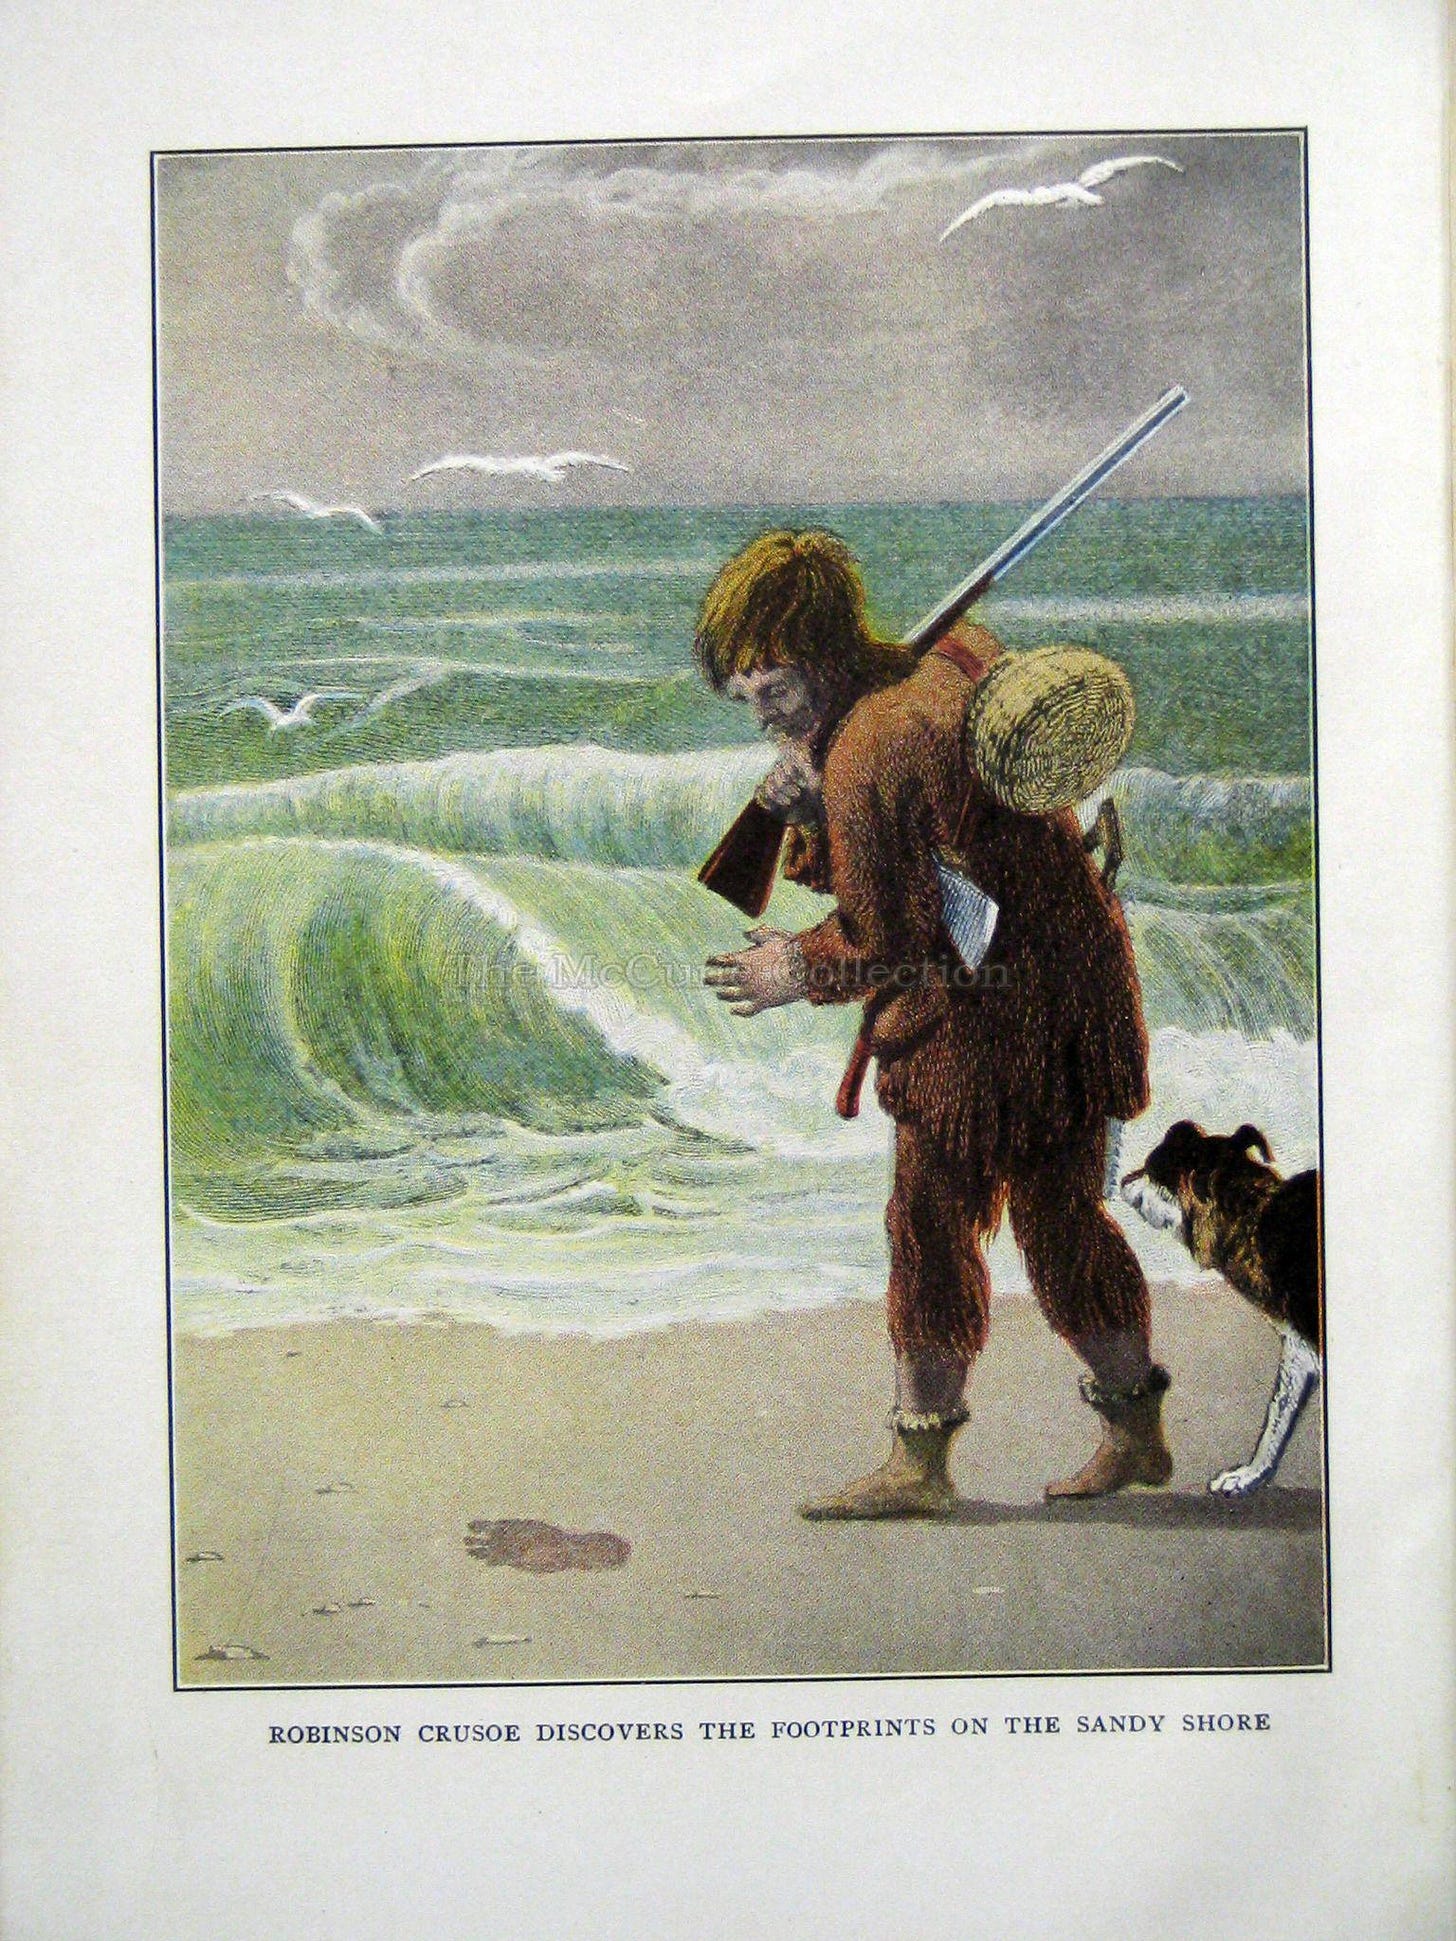 Robinson Crusoe and His Island • The McCune Collection